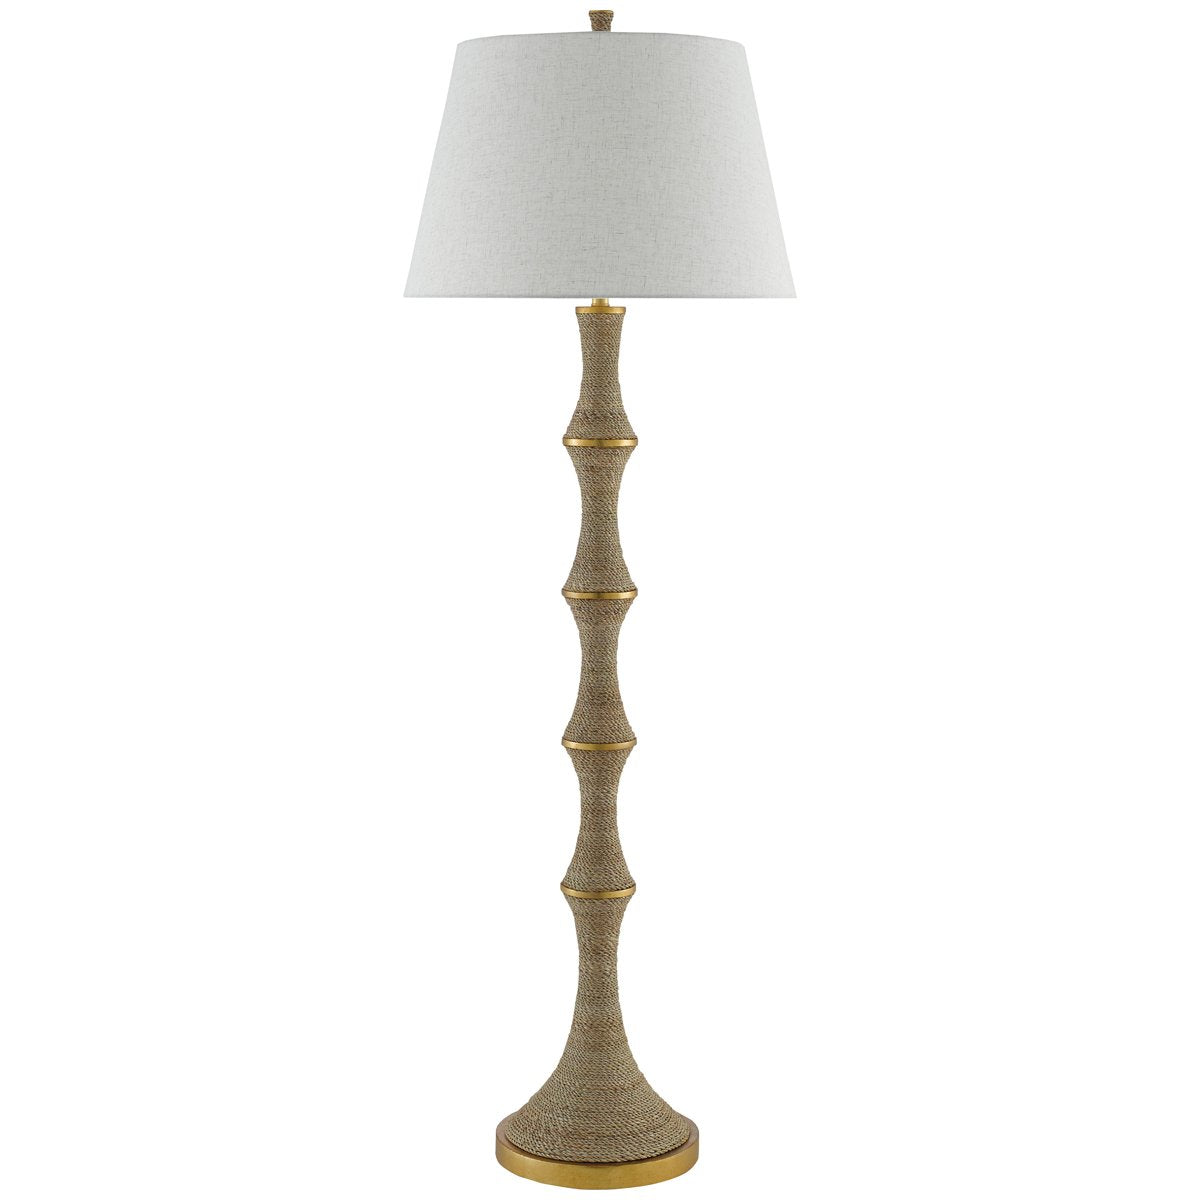 Currey and Company Bourgeon Floor Lamp